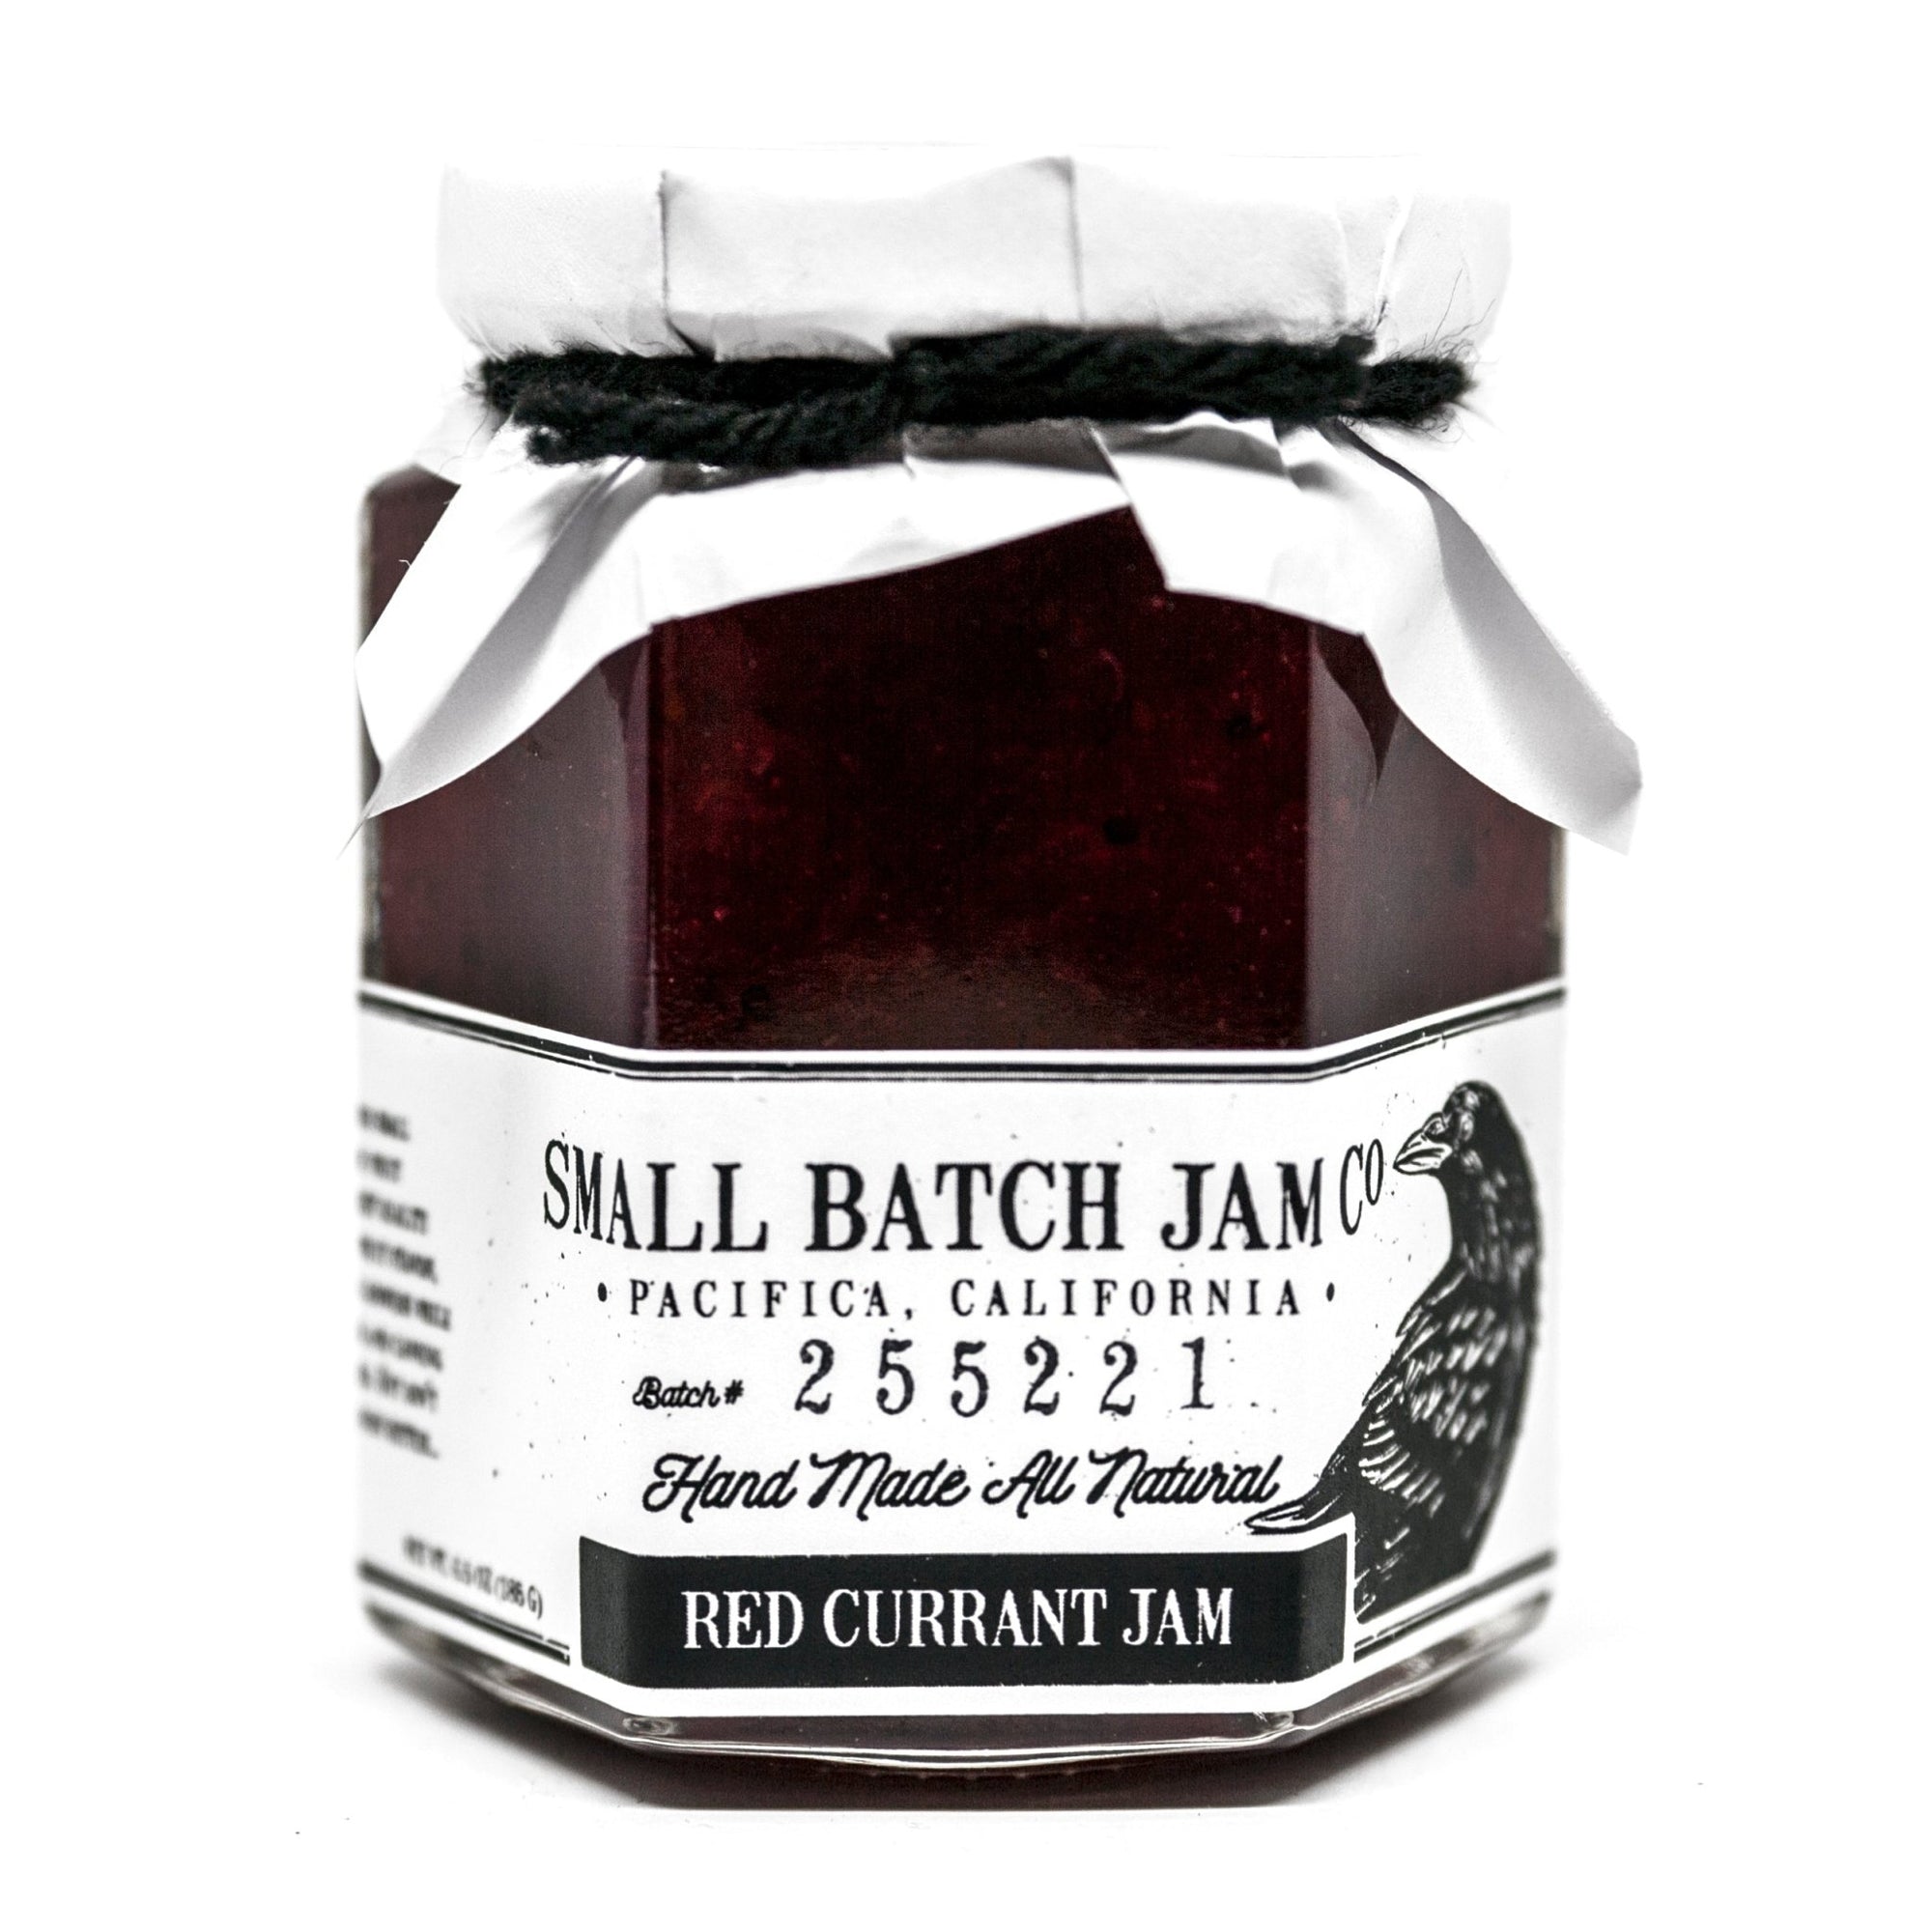 Red Currant Jam - Small Batch Jam Co